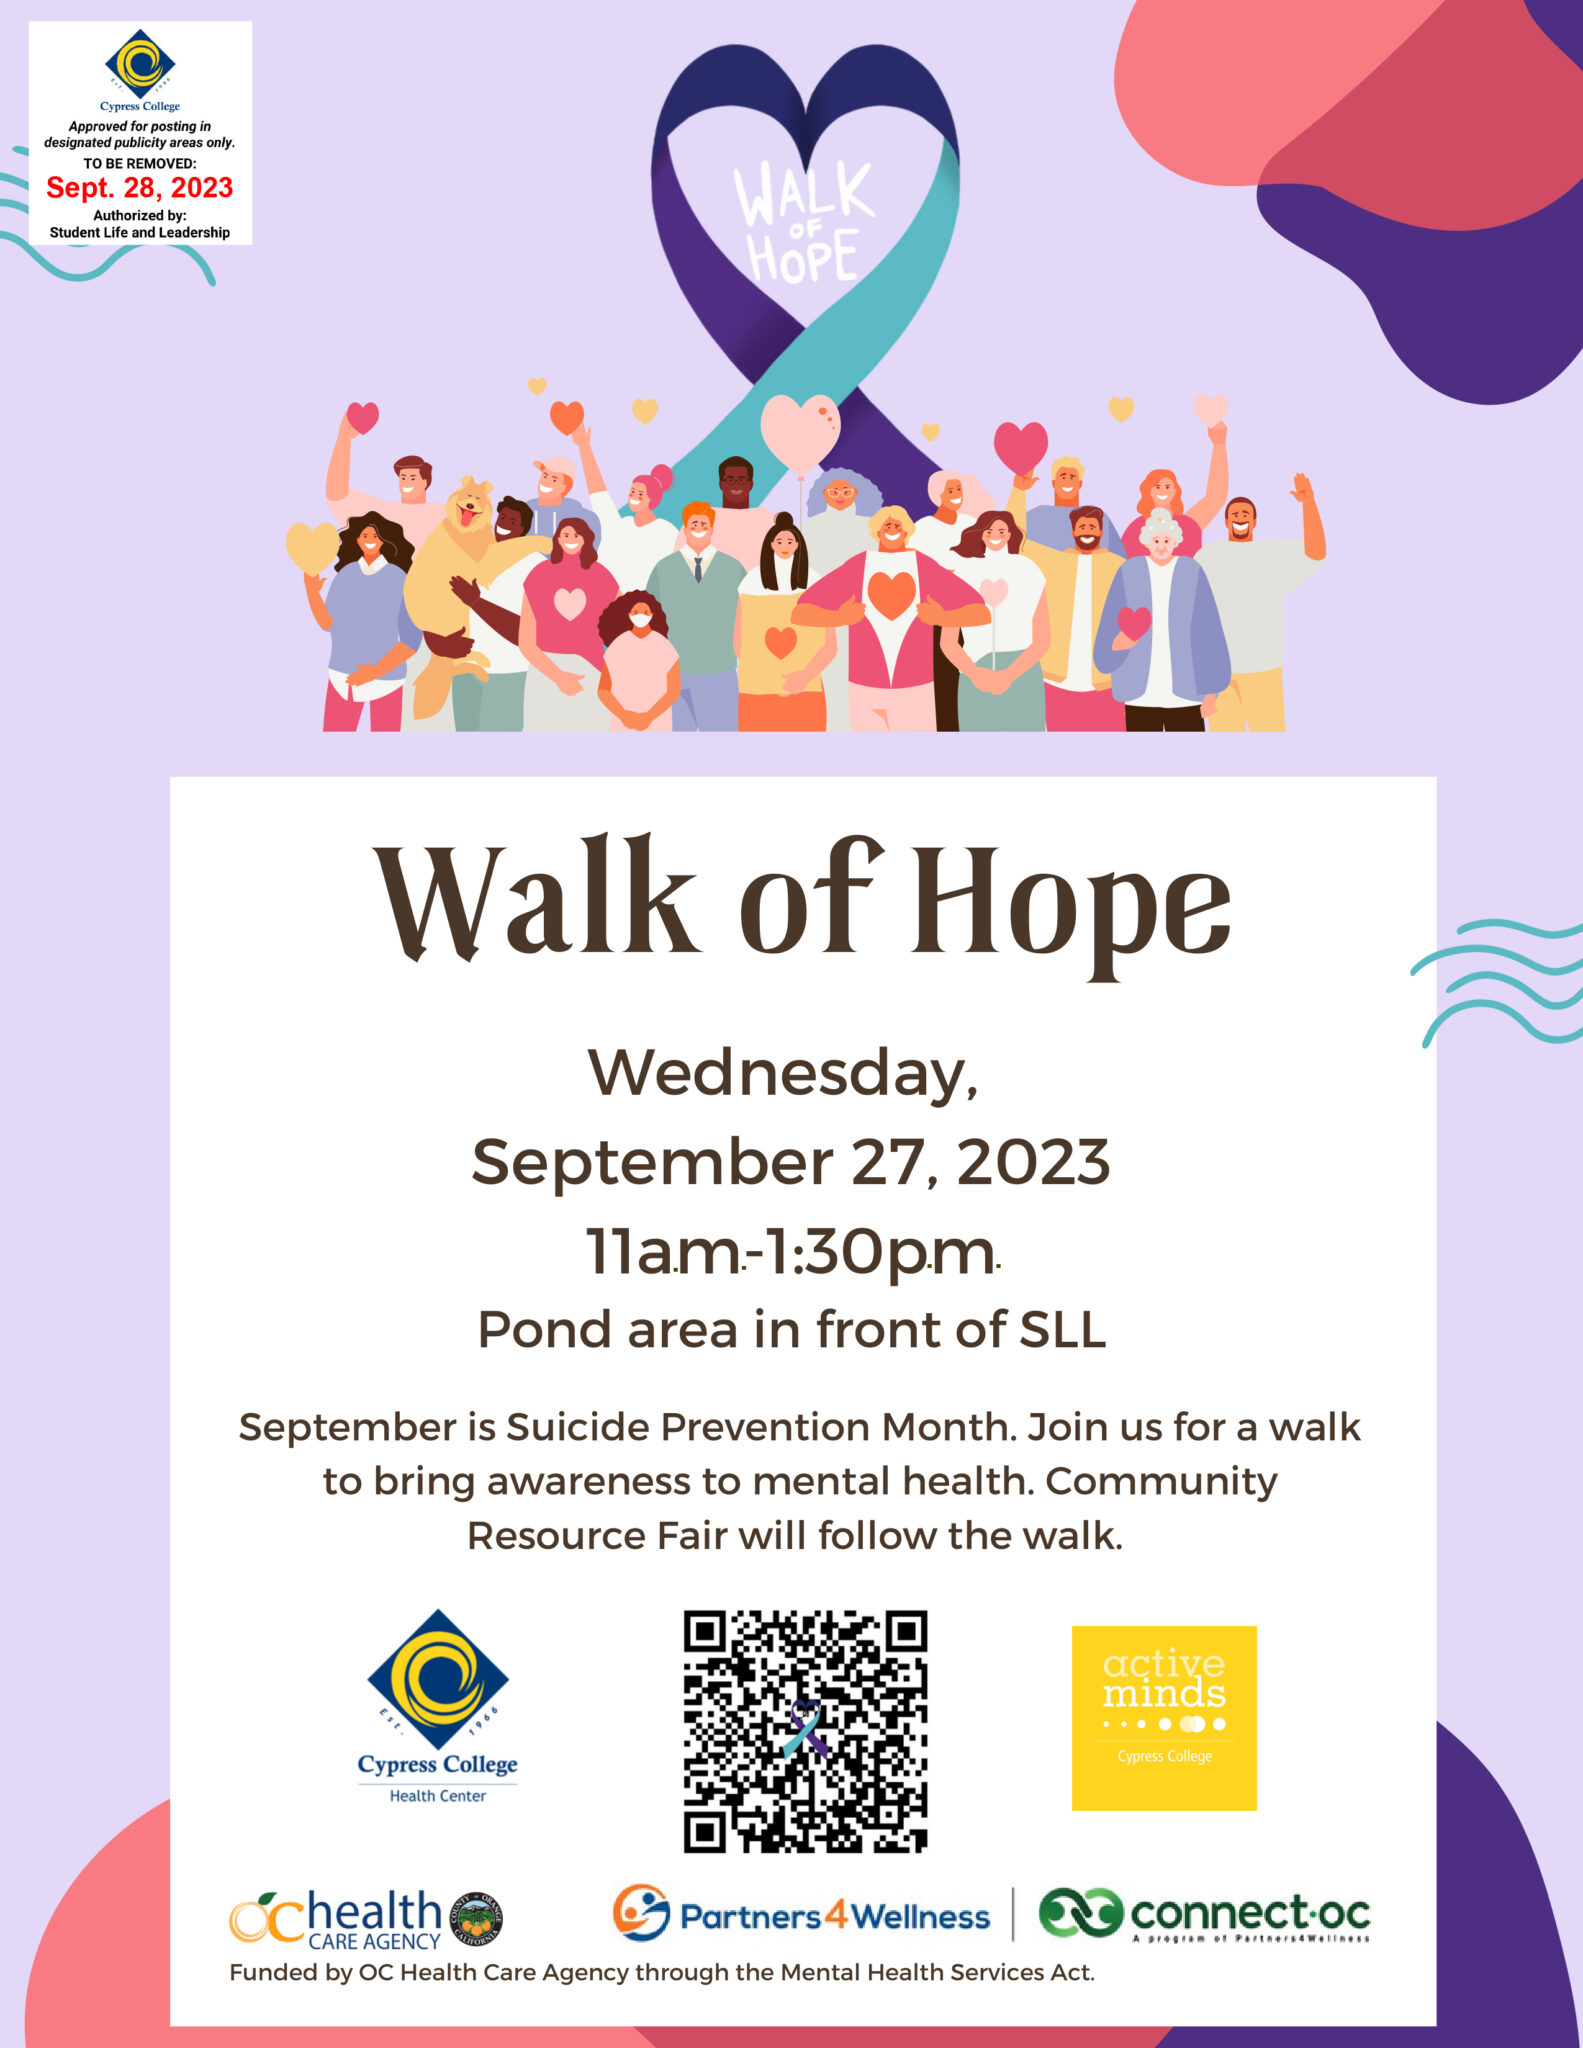 Flyer for Walk of Hope event on September 27, 2023. All information is on web page.